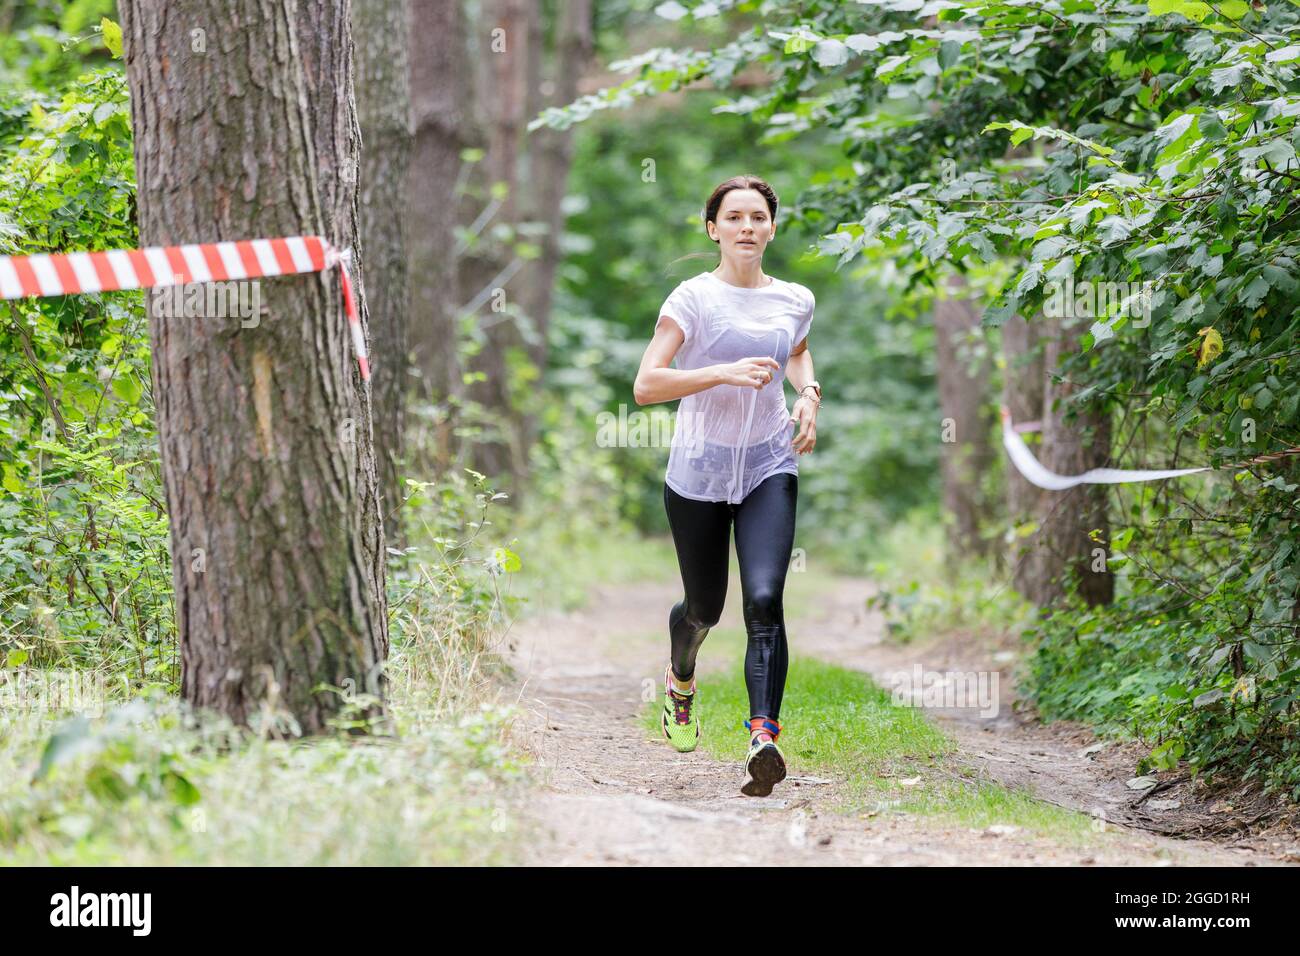 Young wet sportswoman running on her course in obstacle race after crossing a river Stock Photo